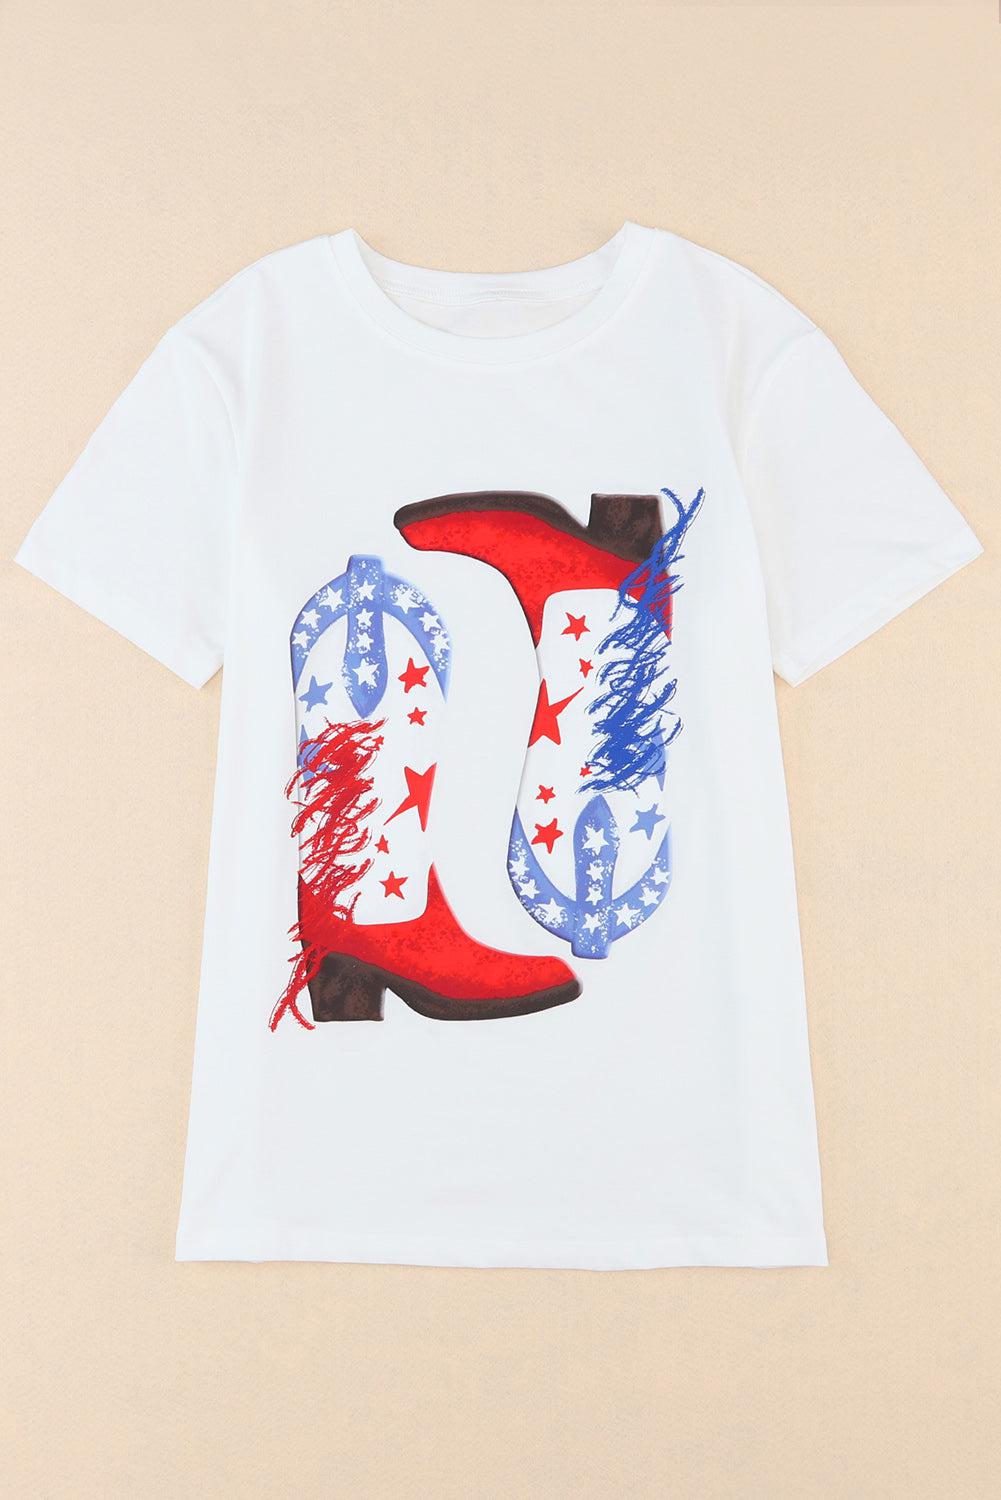 Star Cowboy Boots Graphic Tee BLUE ZONE PLANET